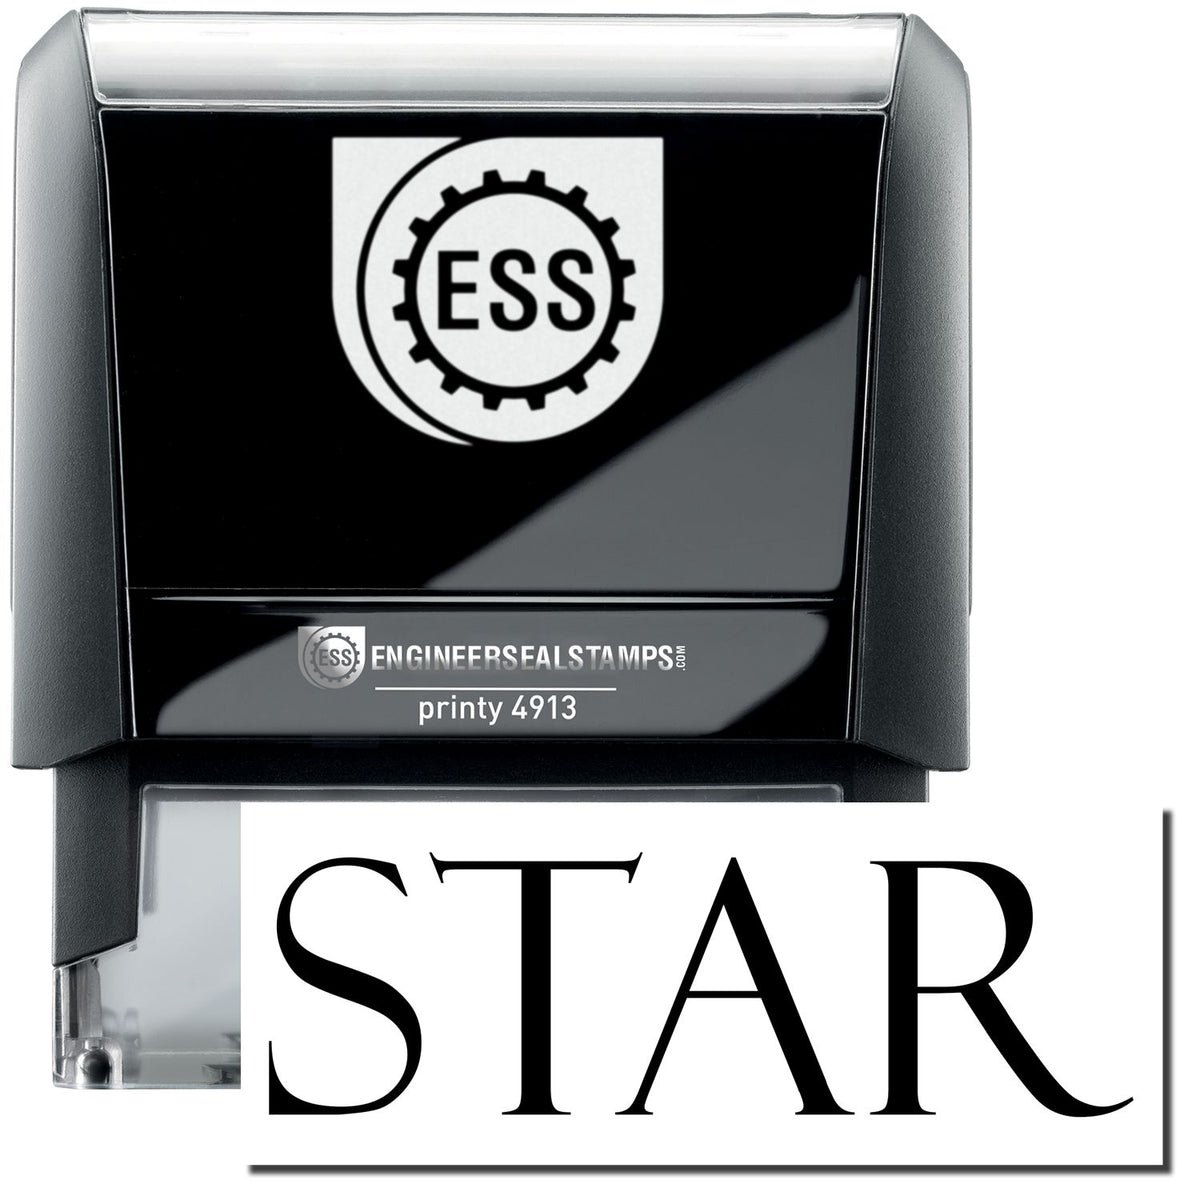 A self-inking stamp with a stamped image showing how the text &quot;STAR&quot; in a large bold font is displayed by it.